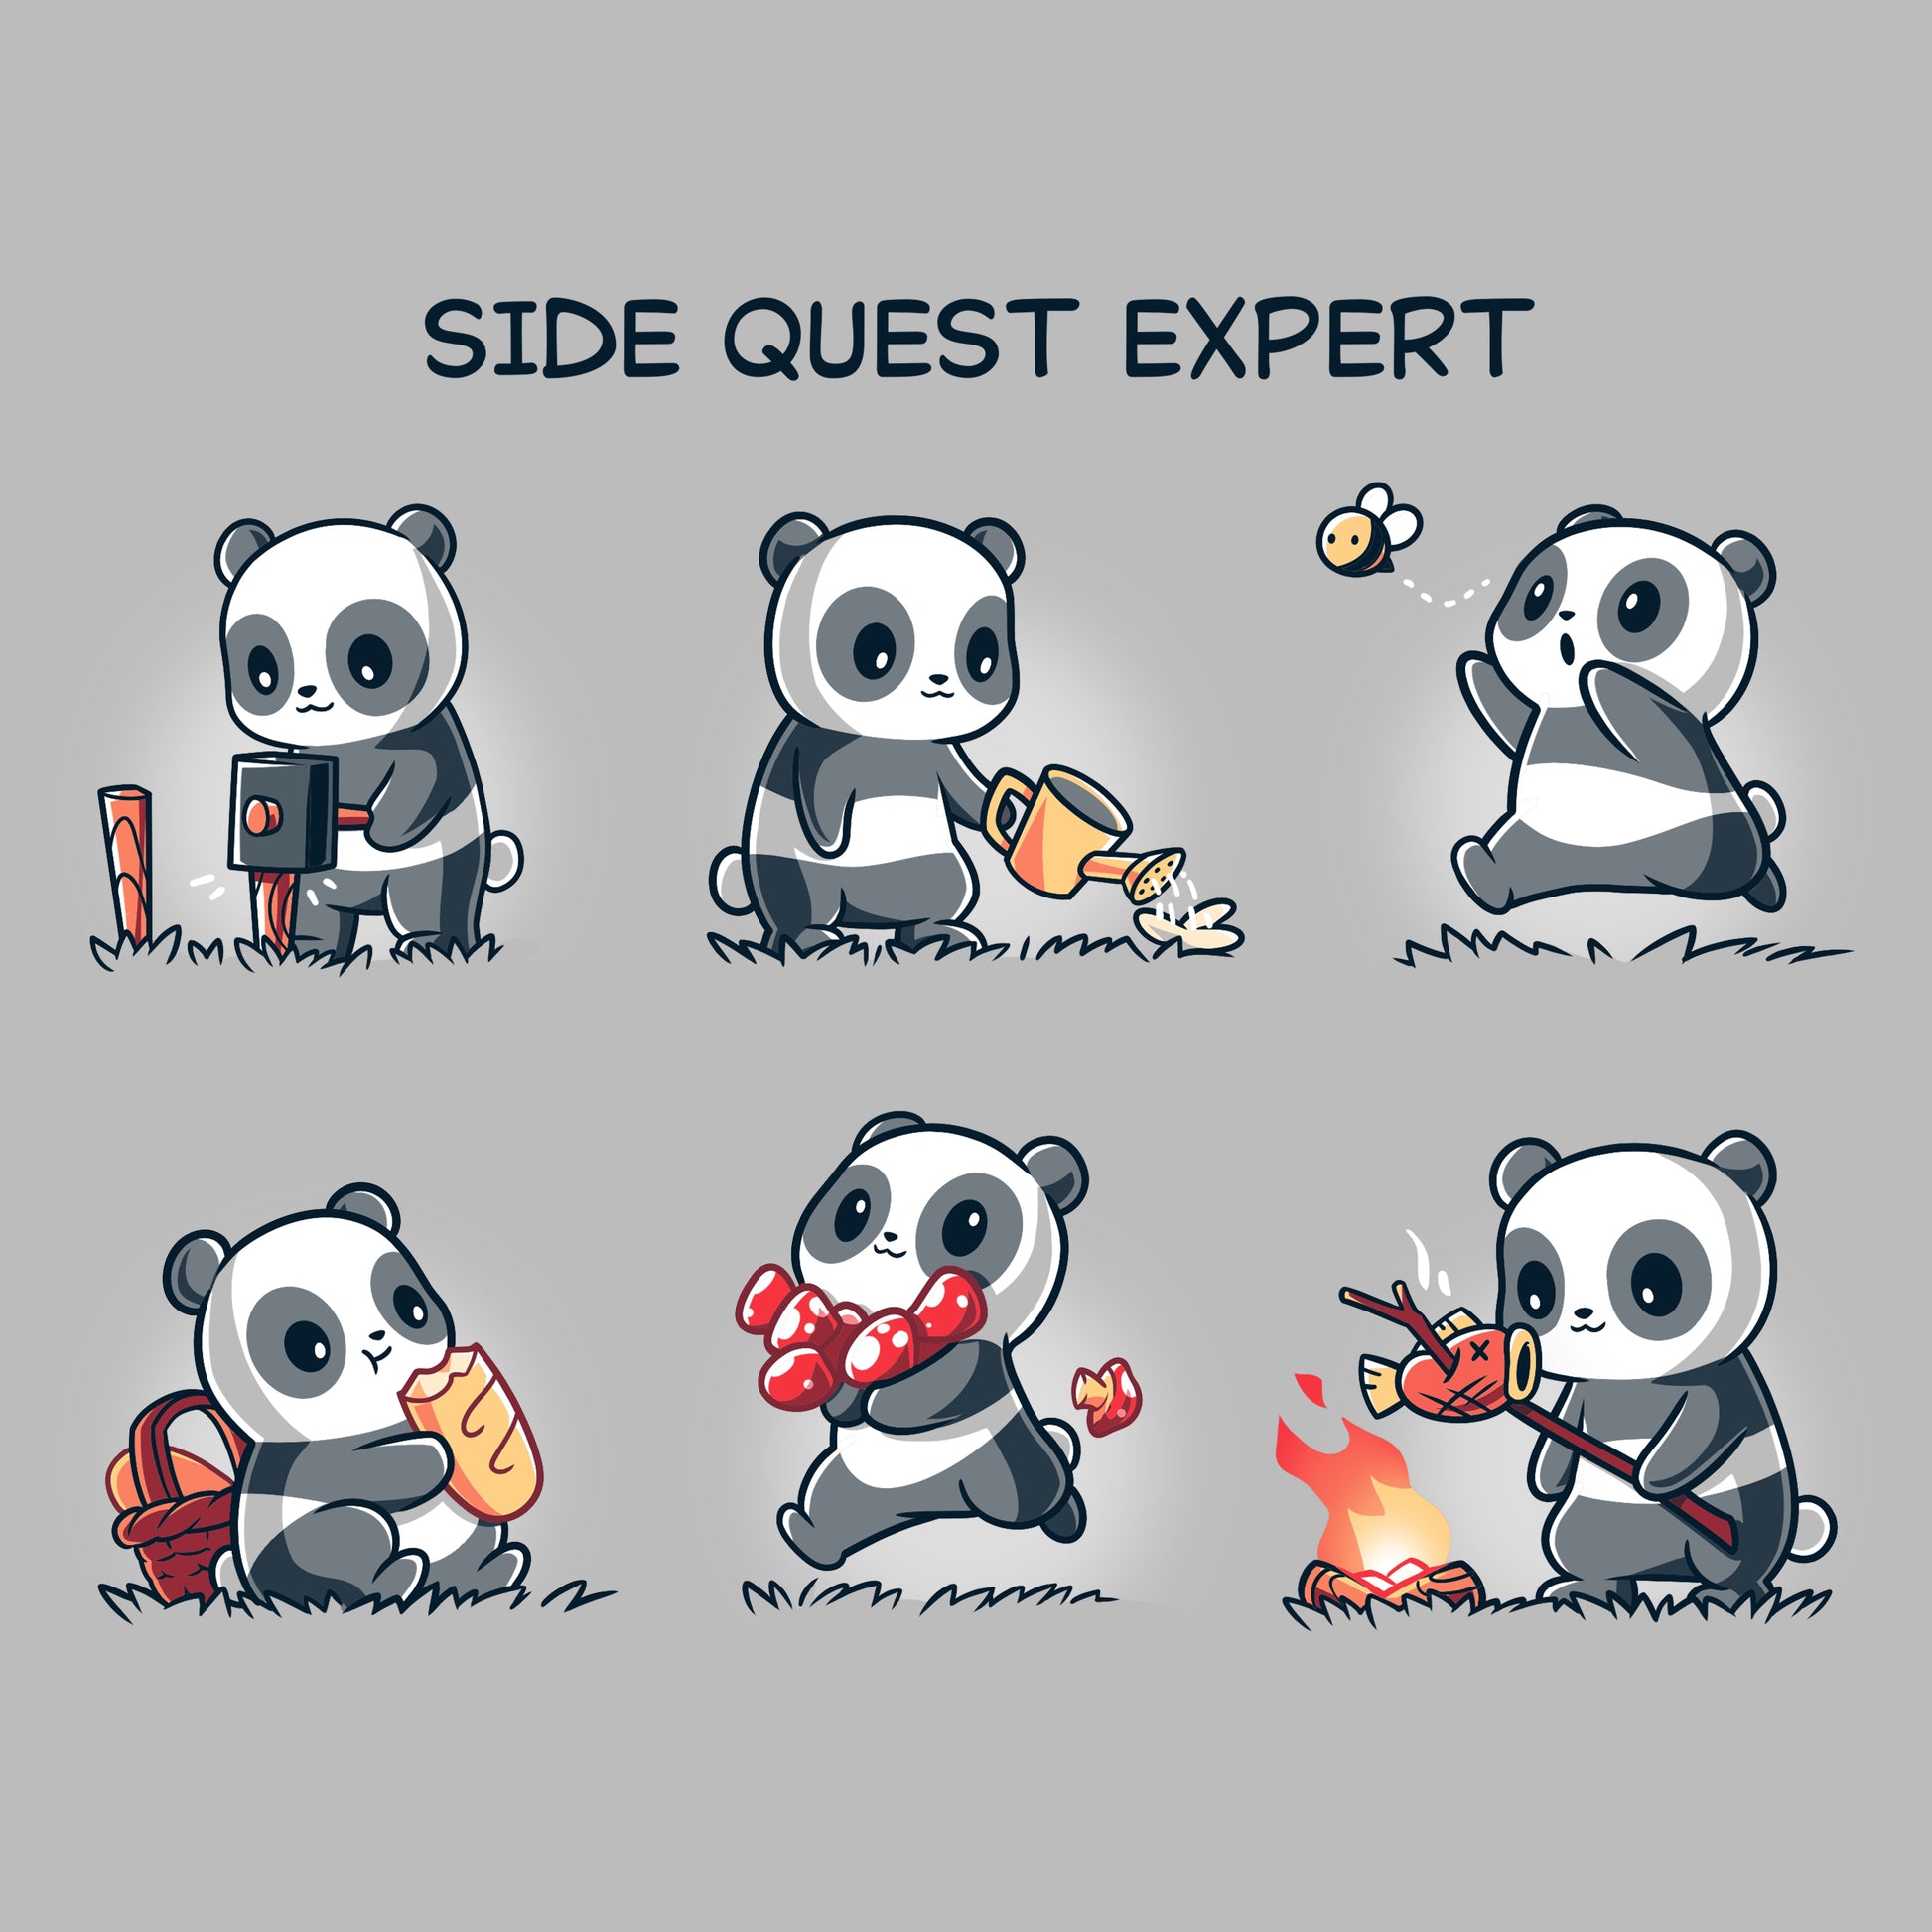 A panda bear in different poses wearing a T-shirt and holding flowers, showcasing its status as a TeeTurtle Side Quest Expert.